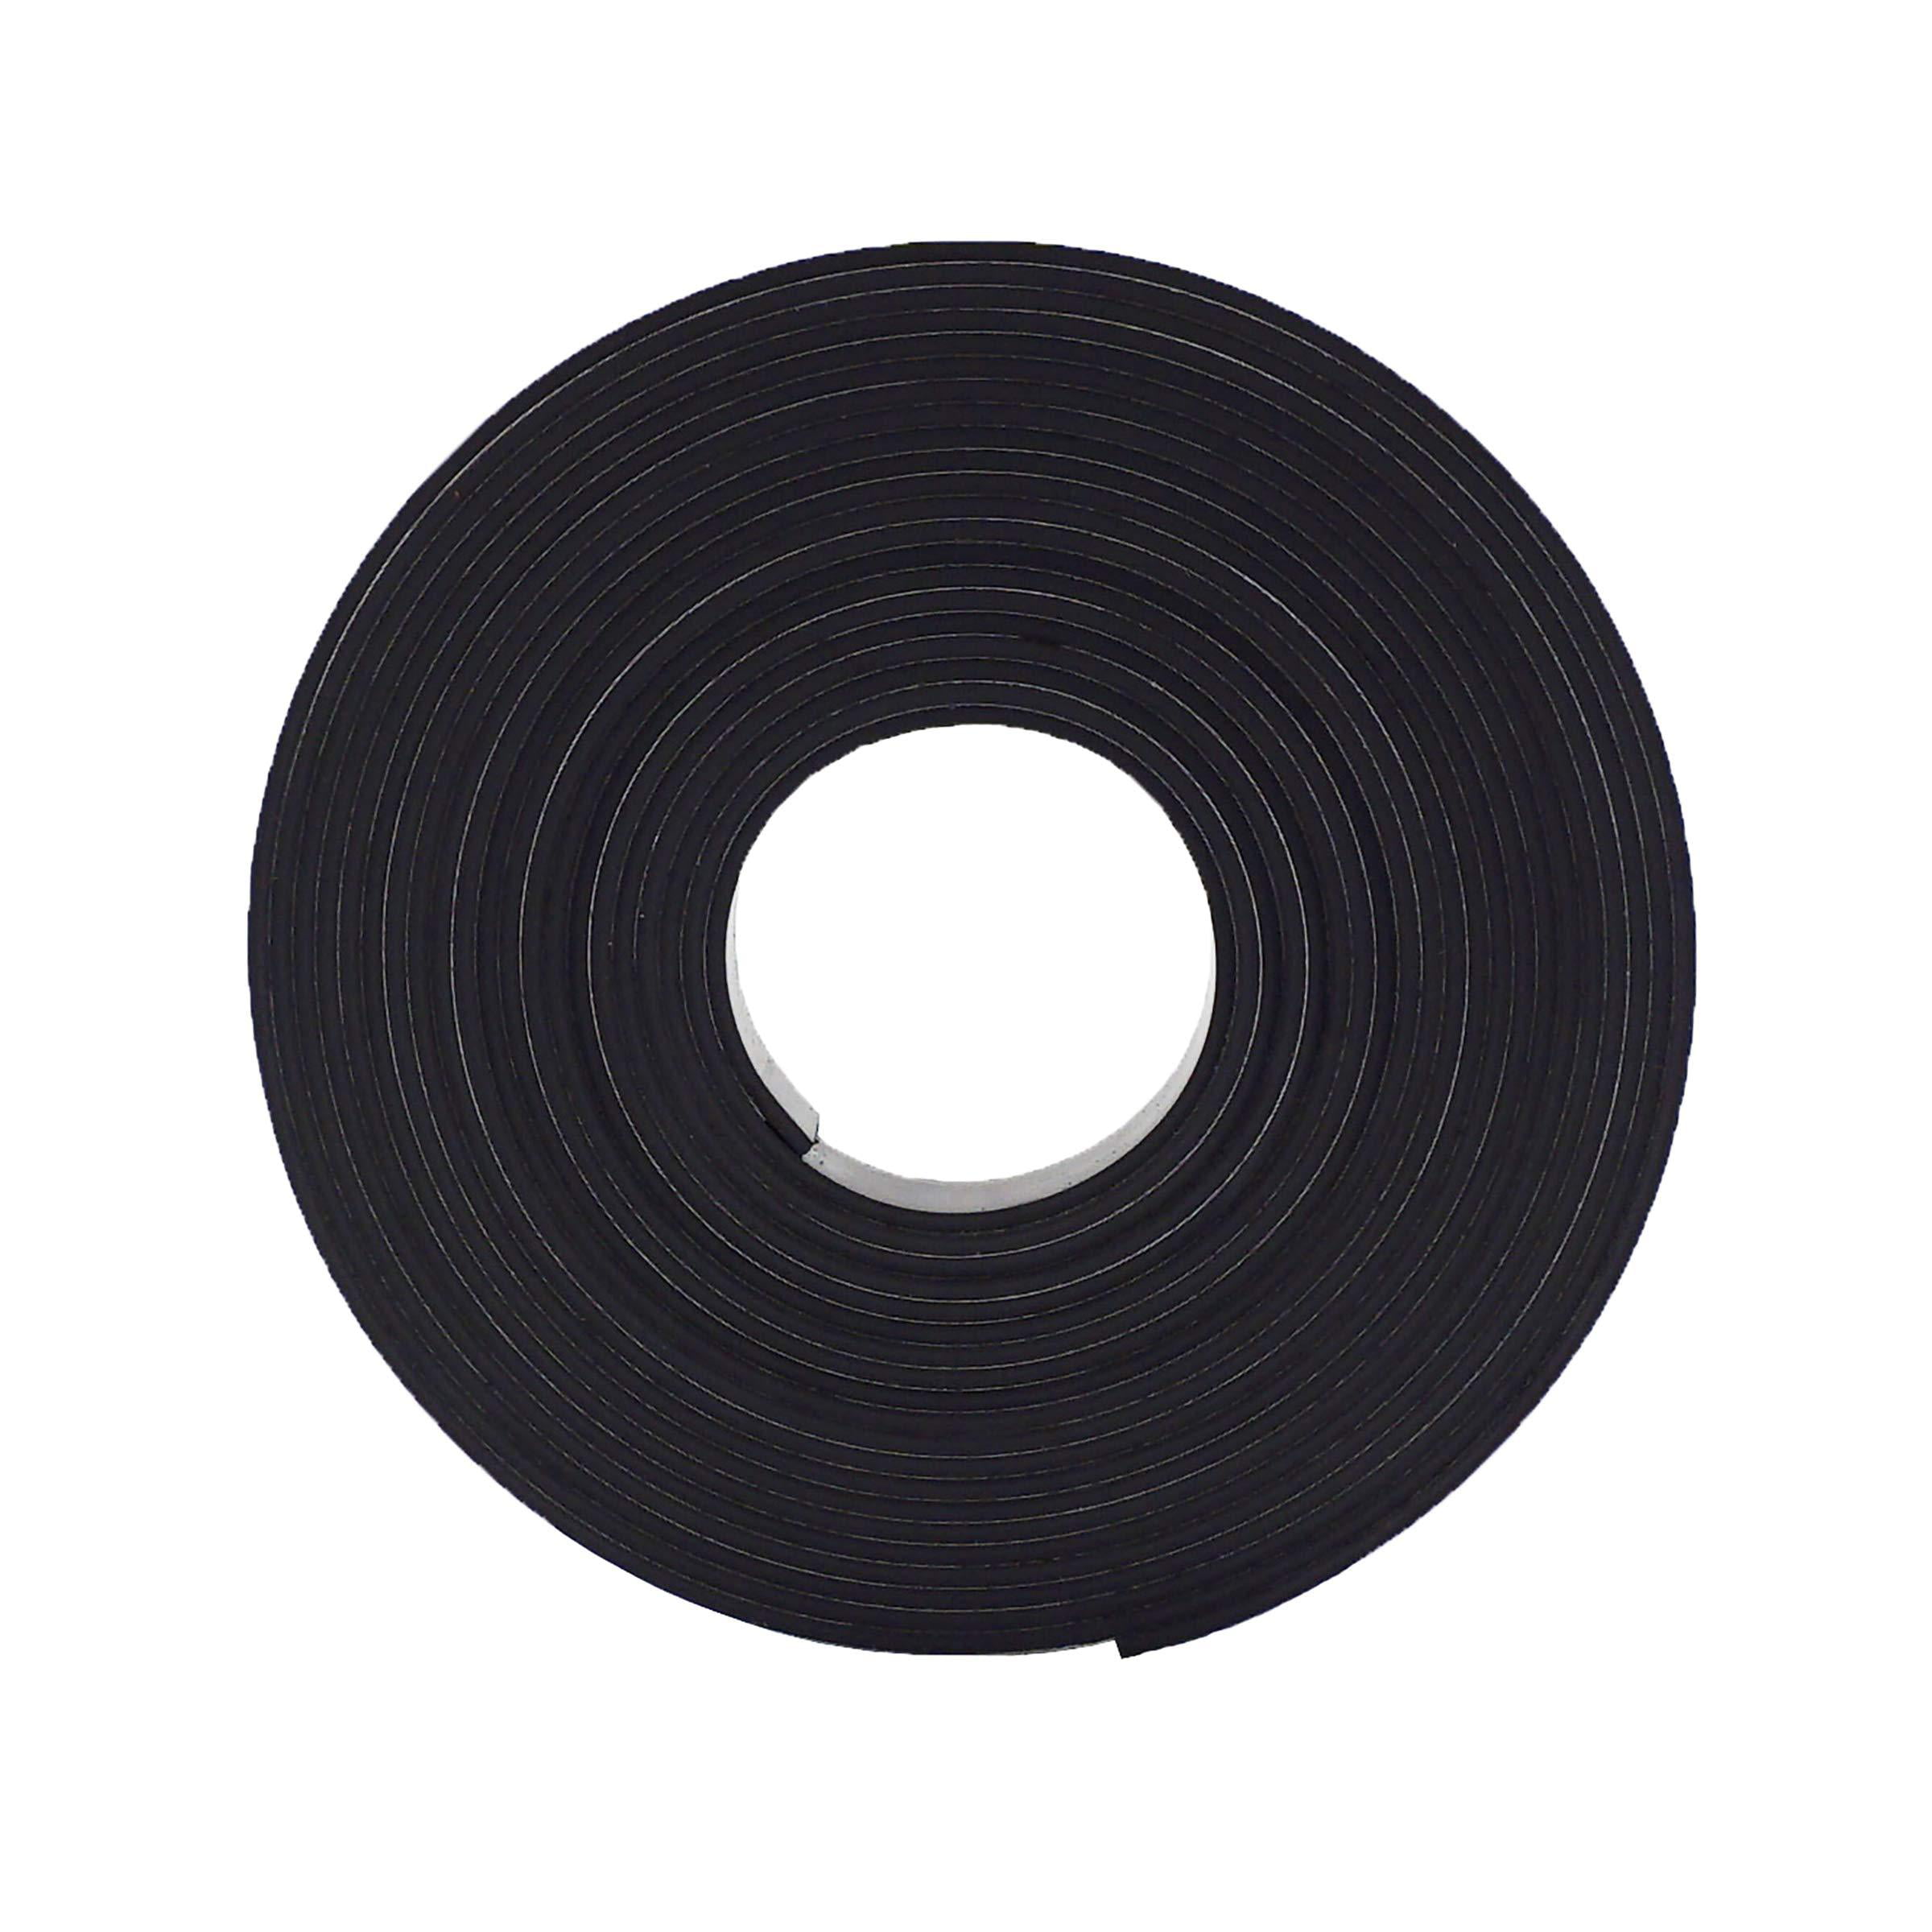 Magnetic Tape 3 Rolls Flexible Magnet Strips with Strong Adhesive Backing (16 Feet x 1/16 Thick x 1/2 Wide) Anisotropic Flexible Magnetic Roll